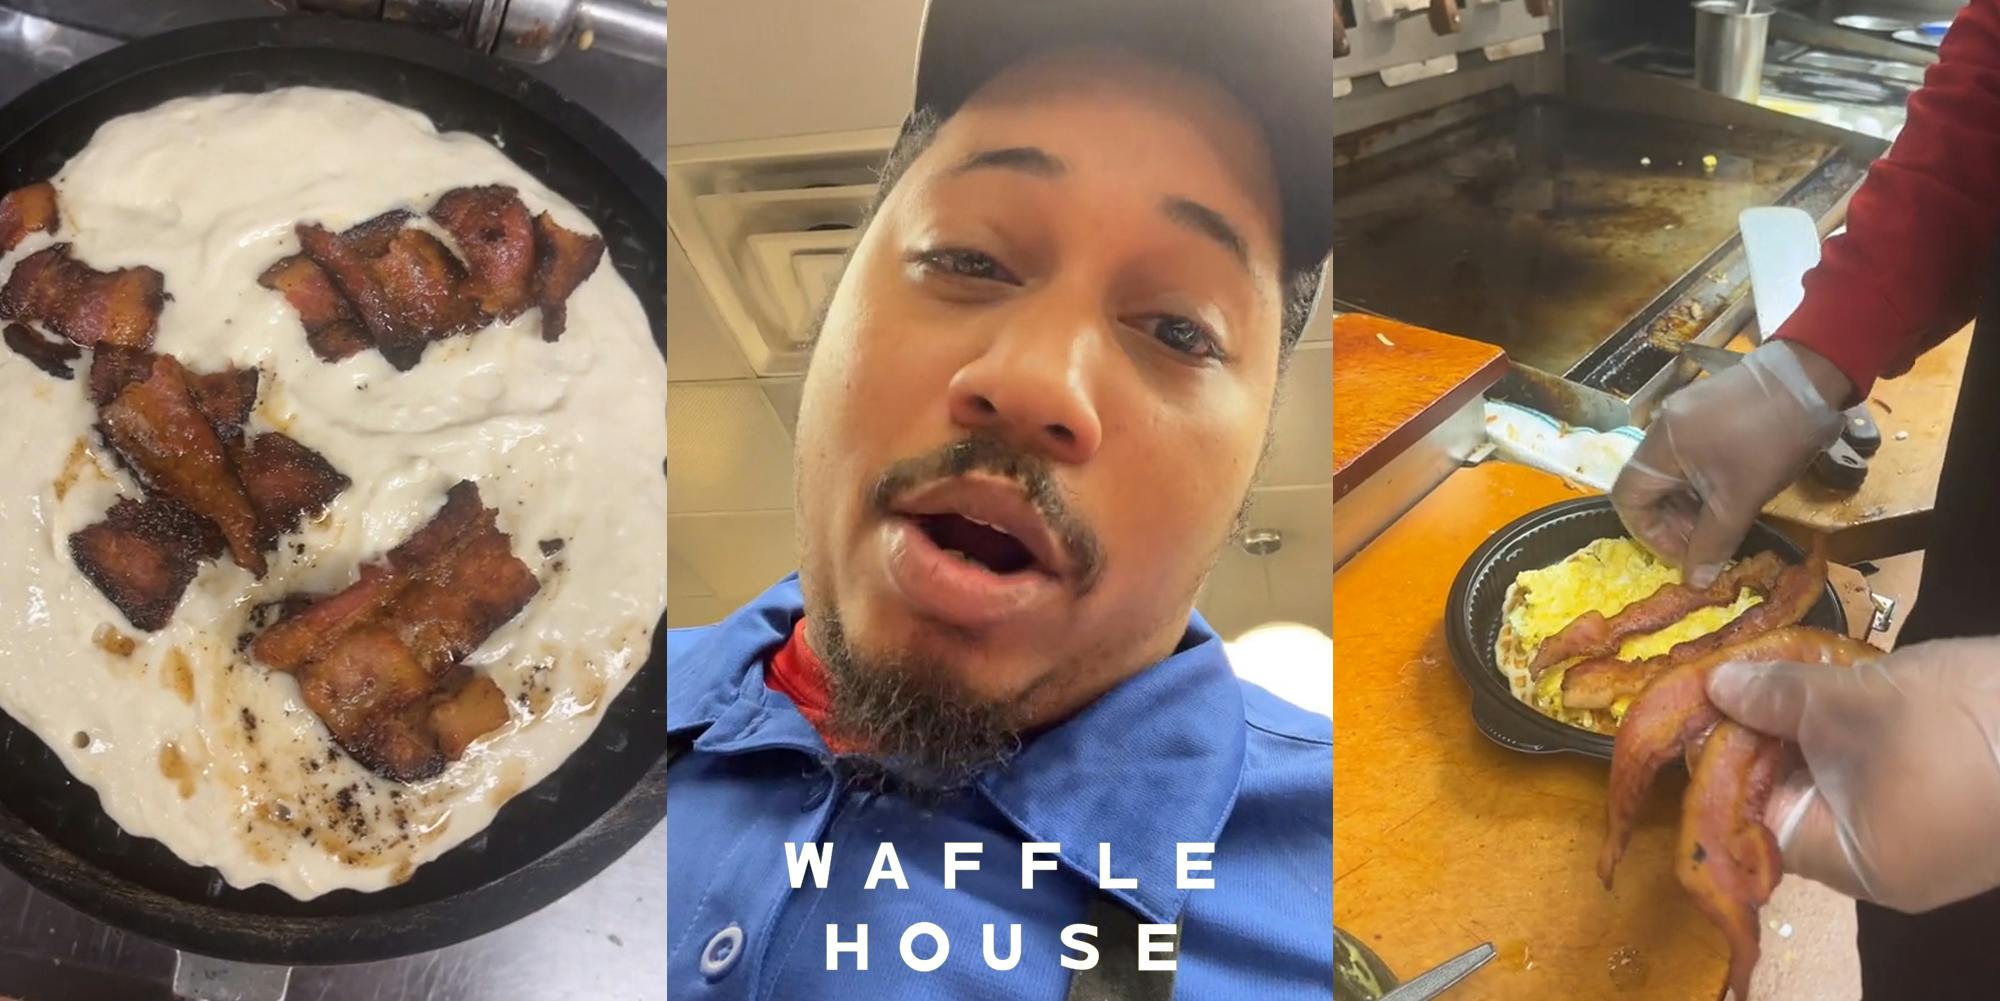 There is no such thing as “too many cups”, waffle house waffle sandwich